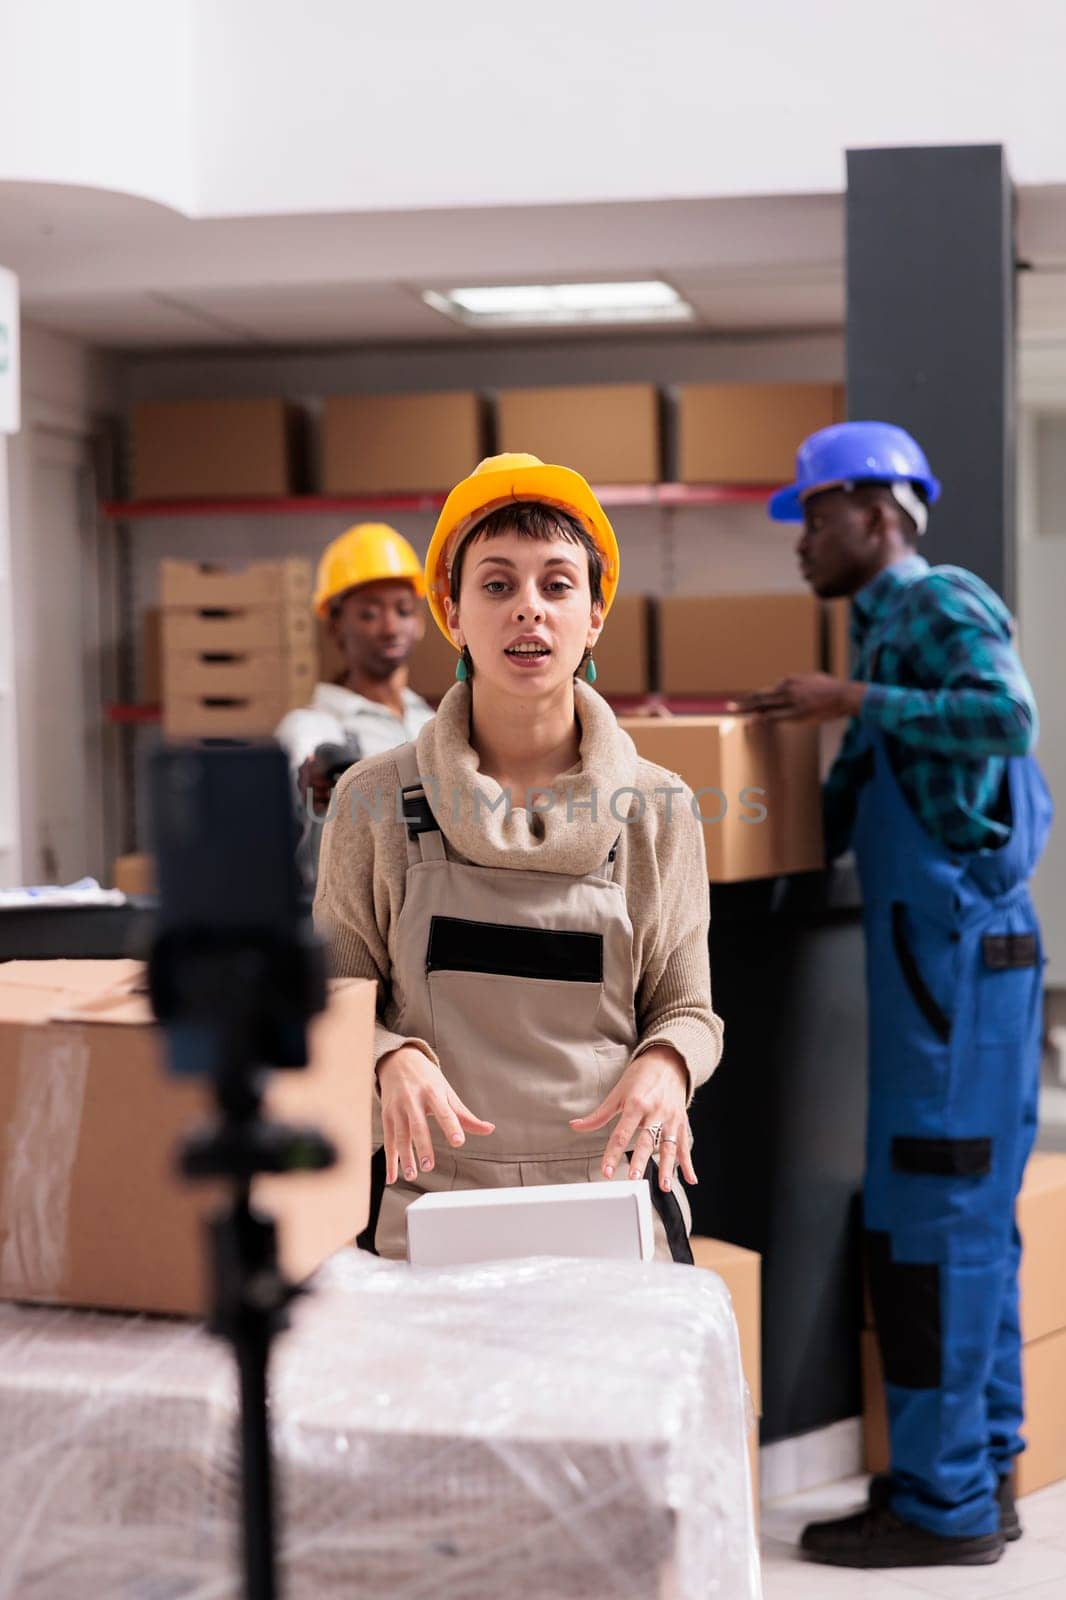 Warehouse operator showing buyer order picking and packing at smartphone camera. Young woman wearing protective helmet preparing parcel for dispatching and looking at mobile phone on tripod